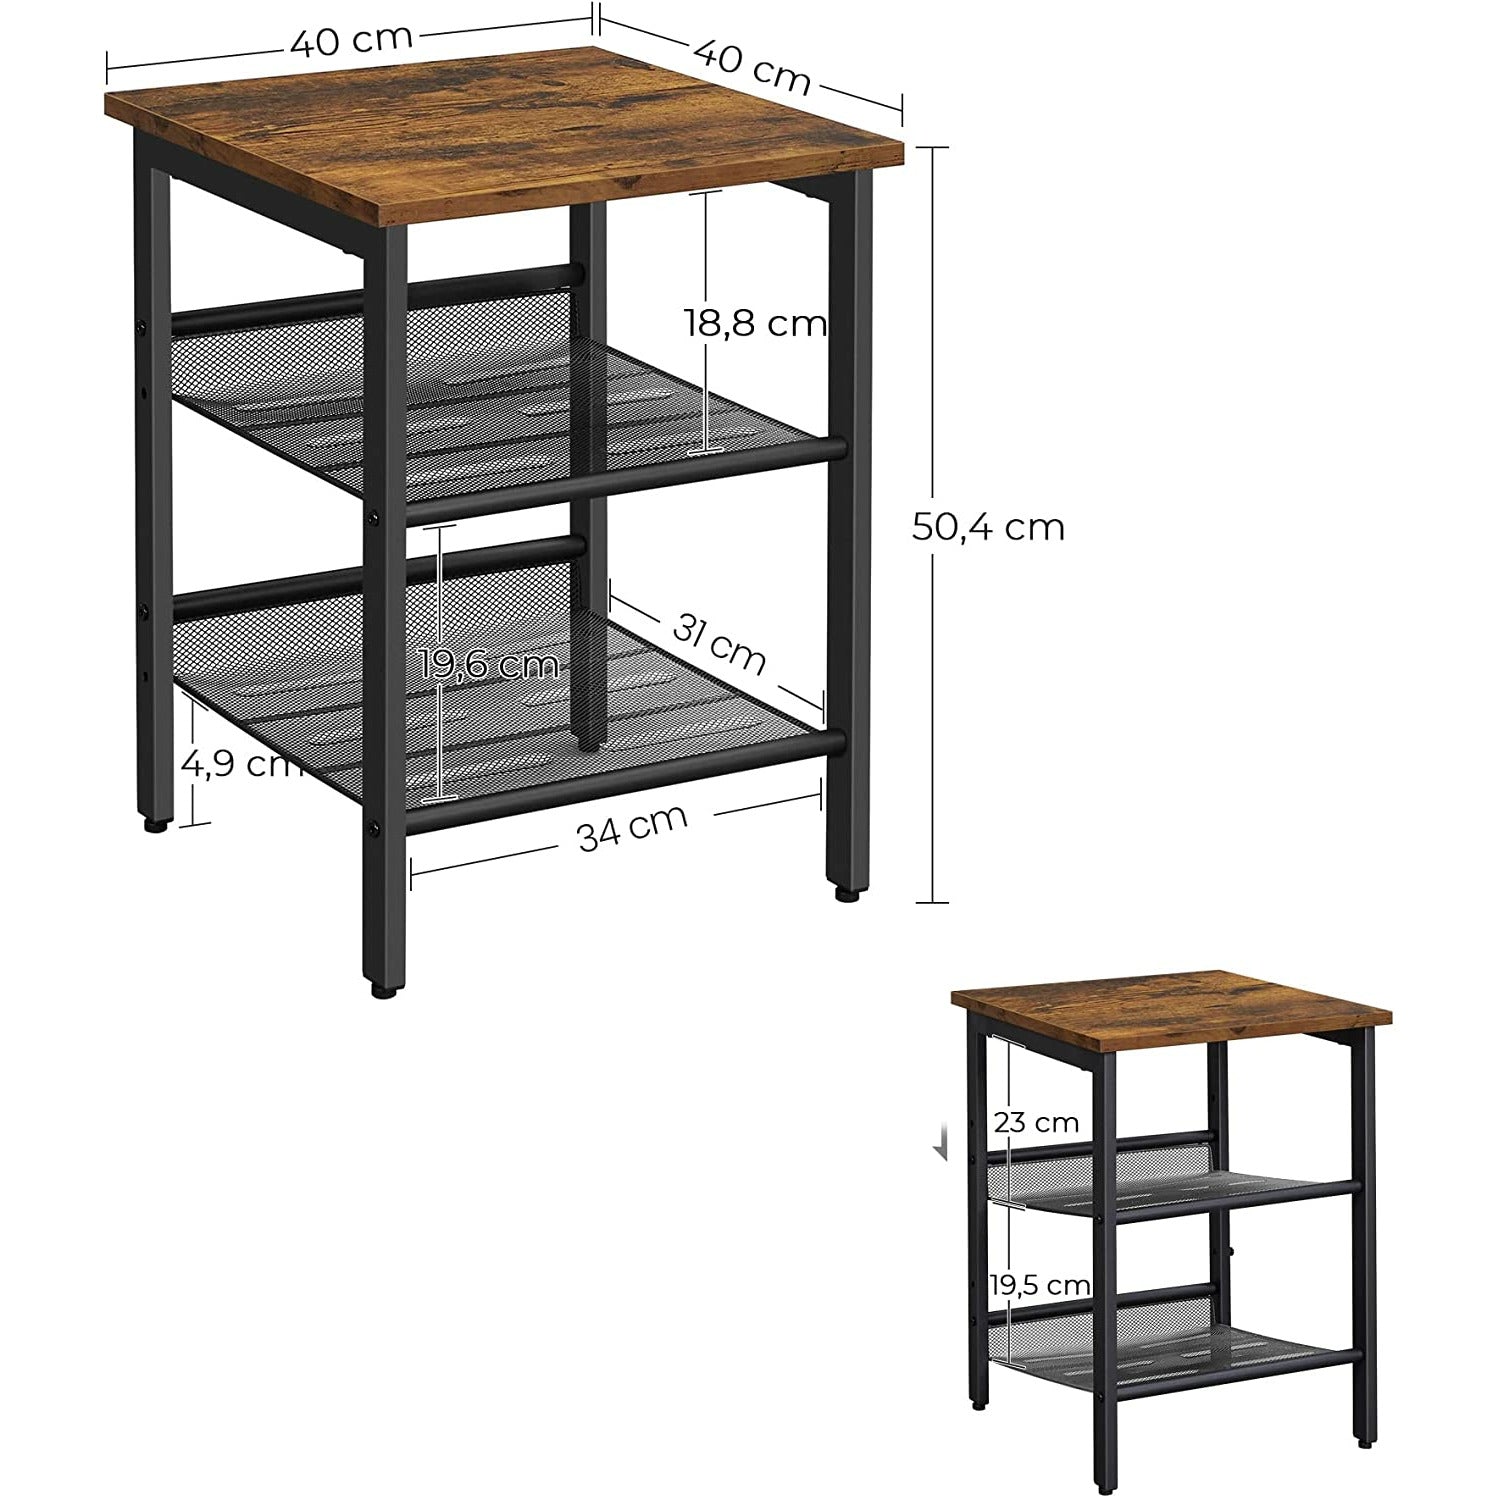 Industrial Set of 2 Bedside Tables with Adjustable Mesh Shelves Rustic Brown and Black